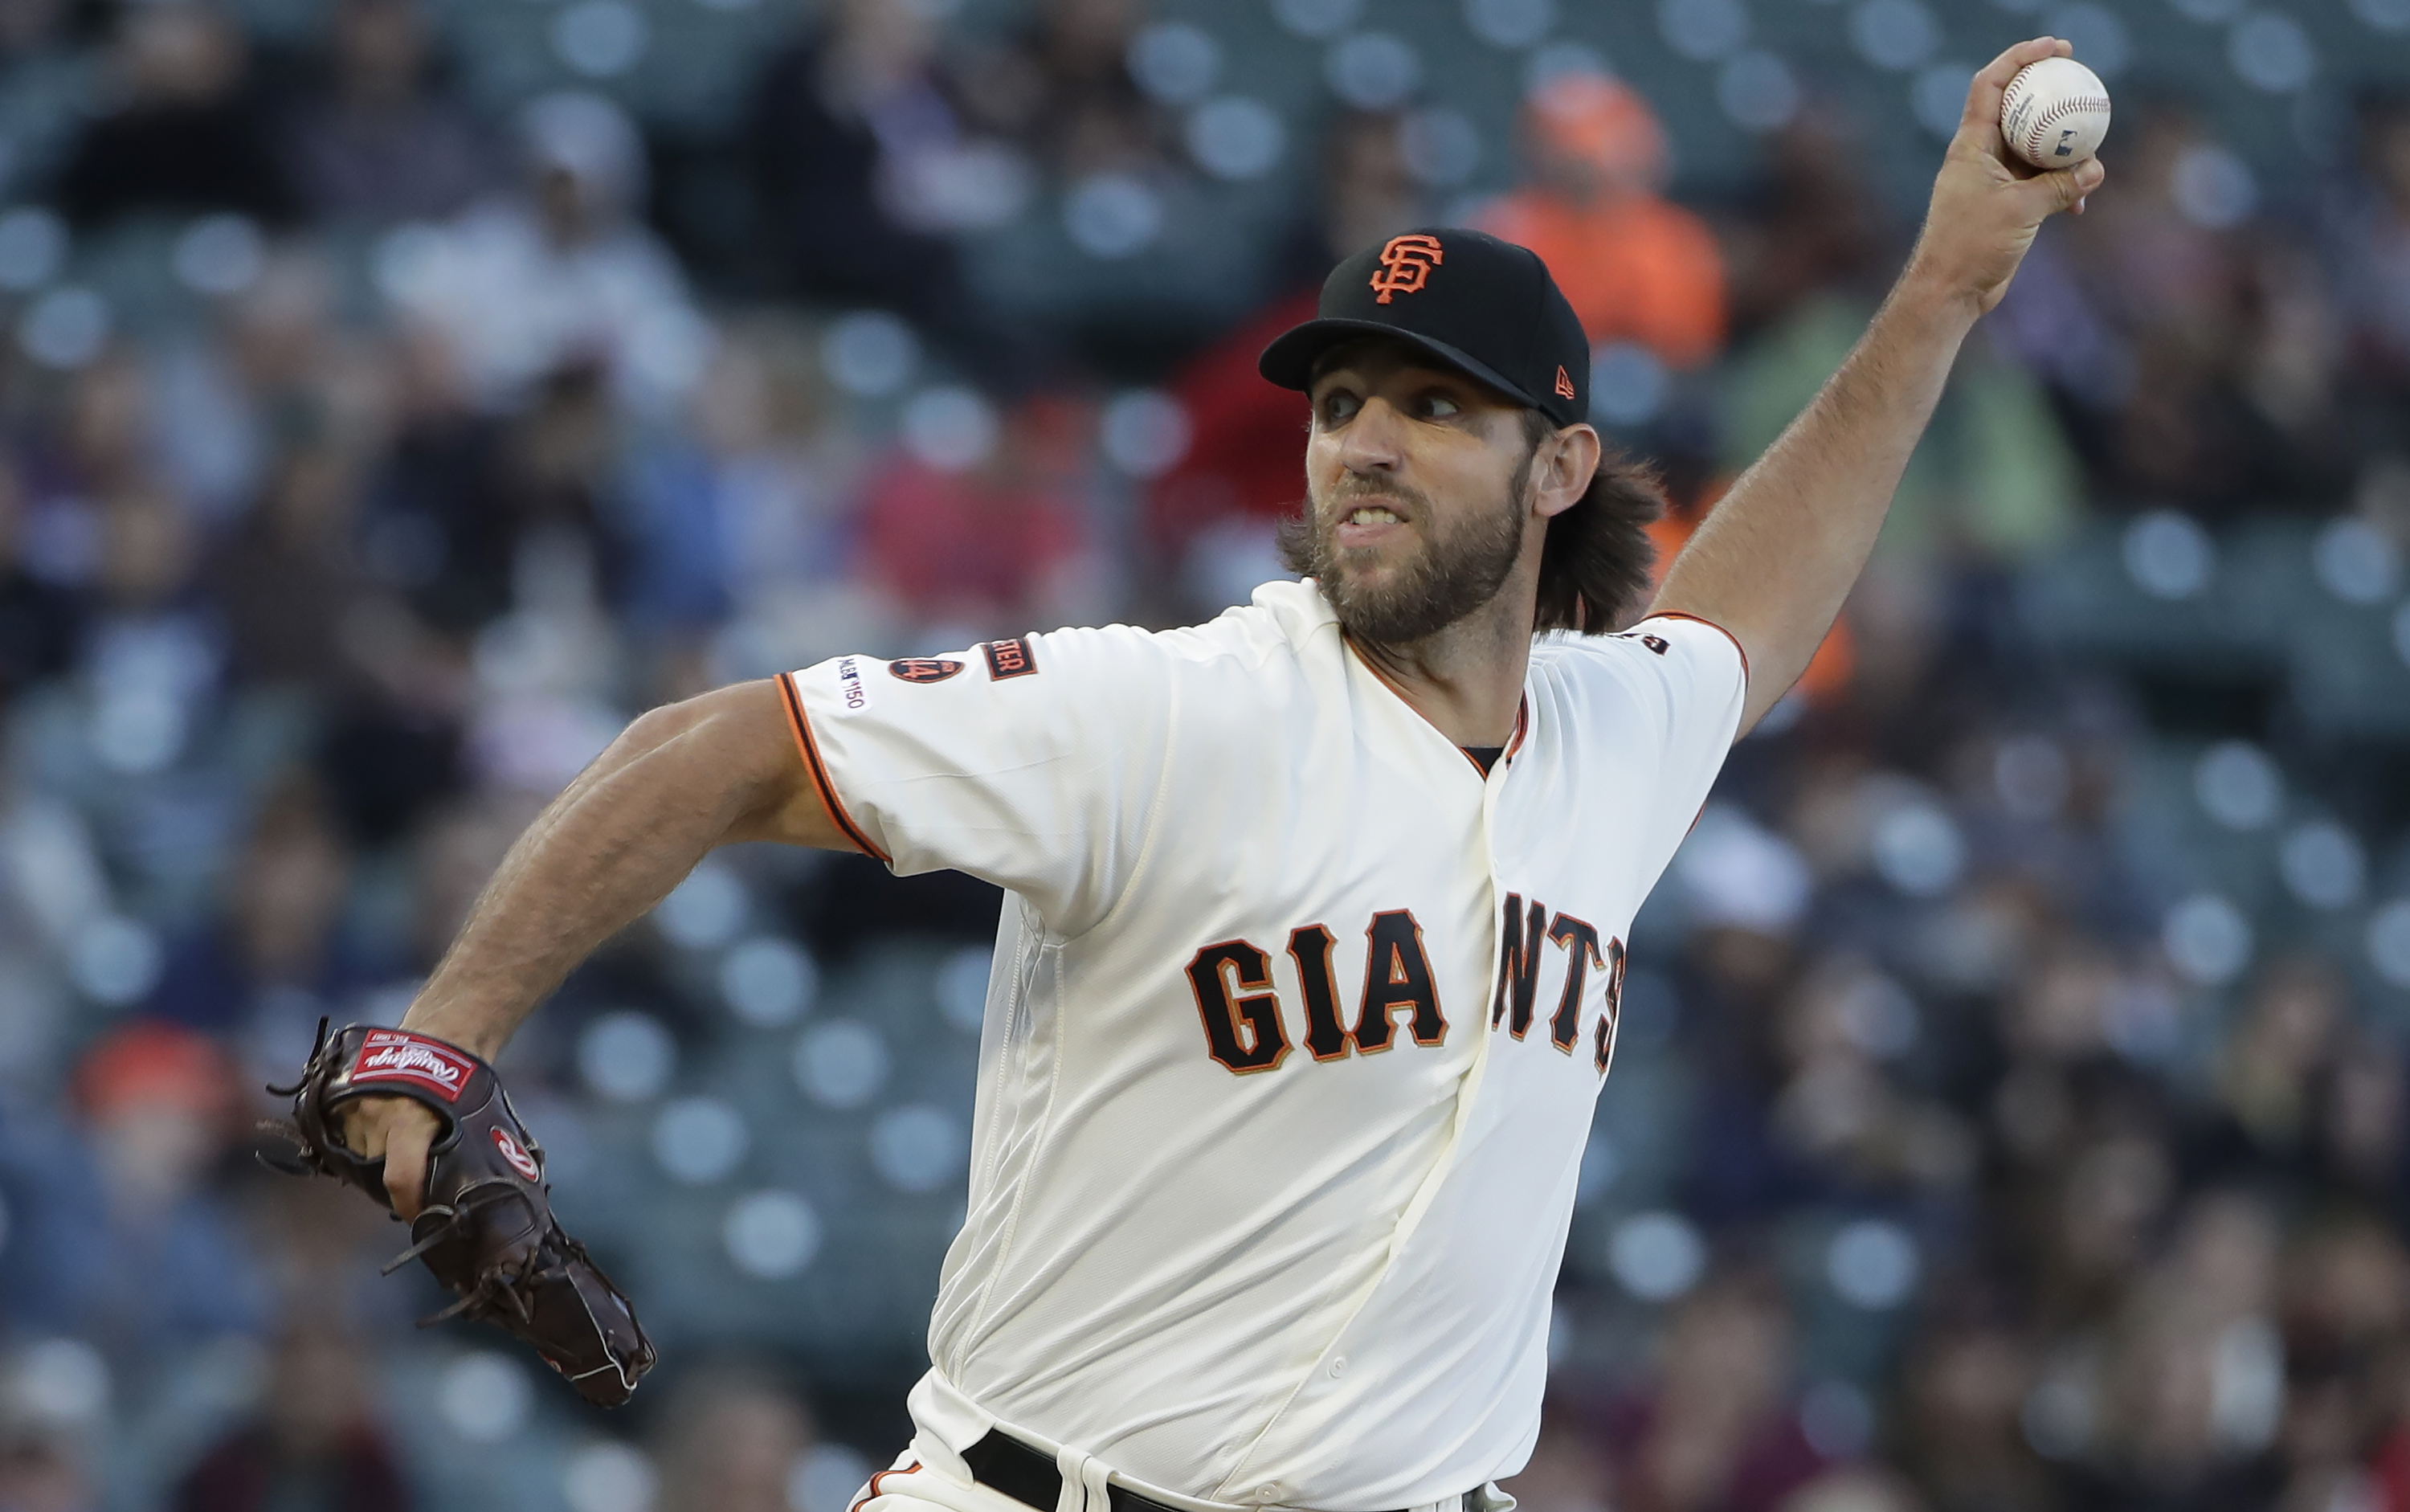 Bumgarner strikes out 11 in Giants' 4-2 win over Rockies